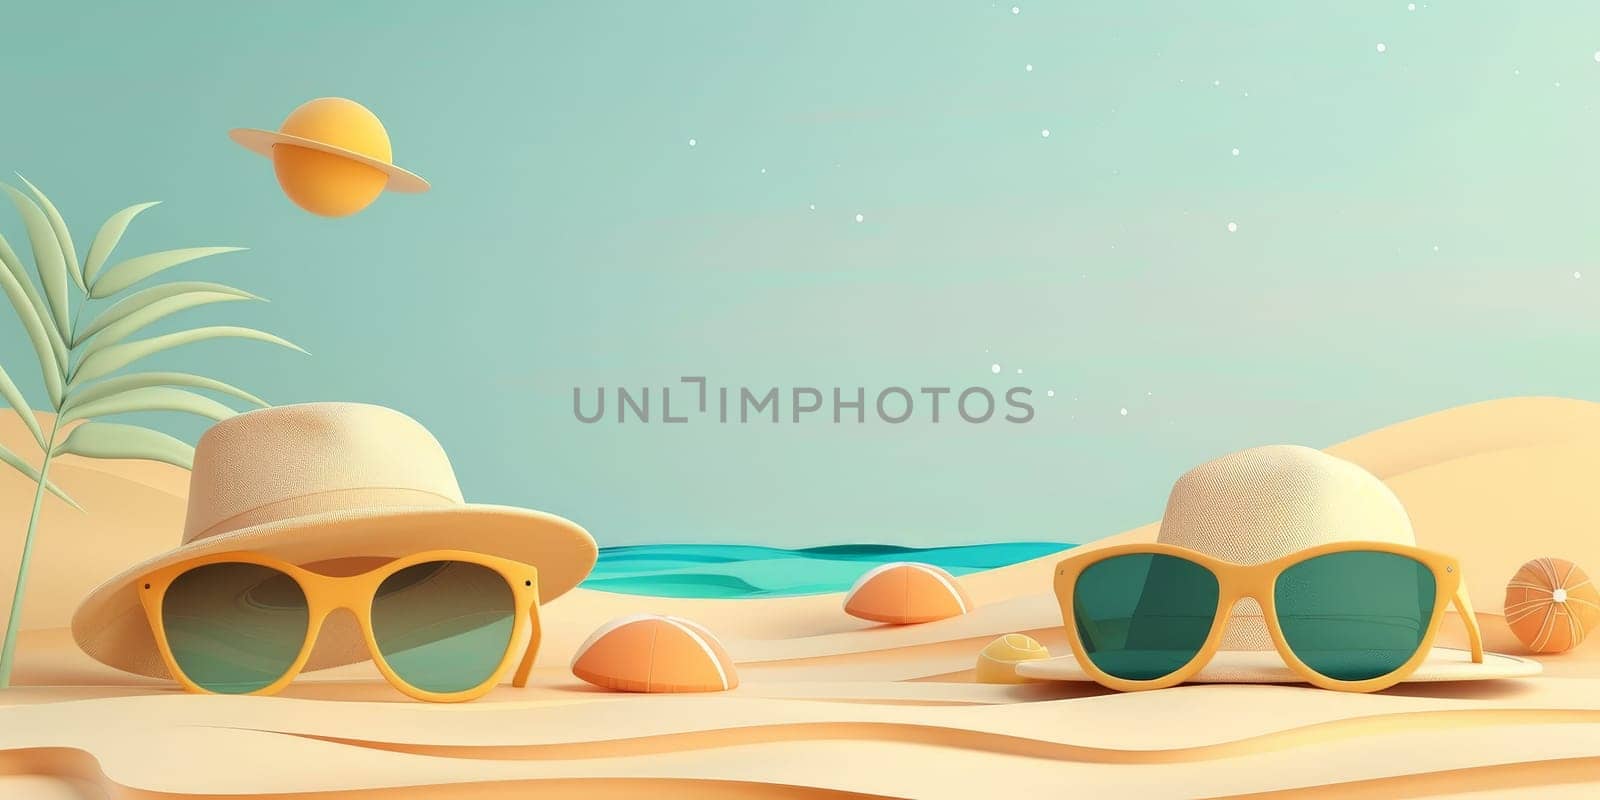 Two people are on a beach with sunglasses and hats by nateemee